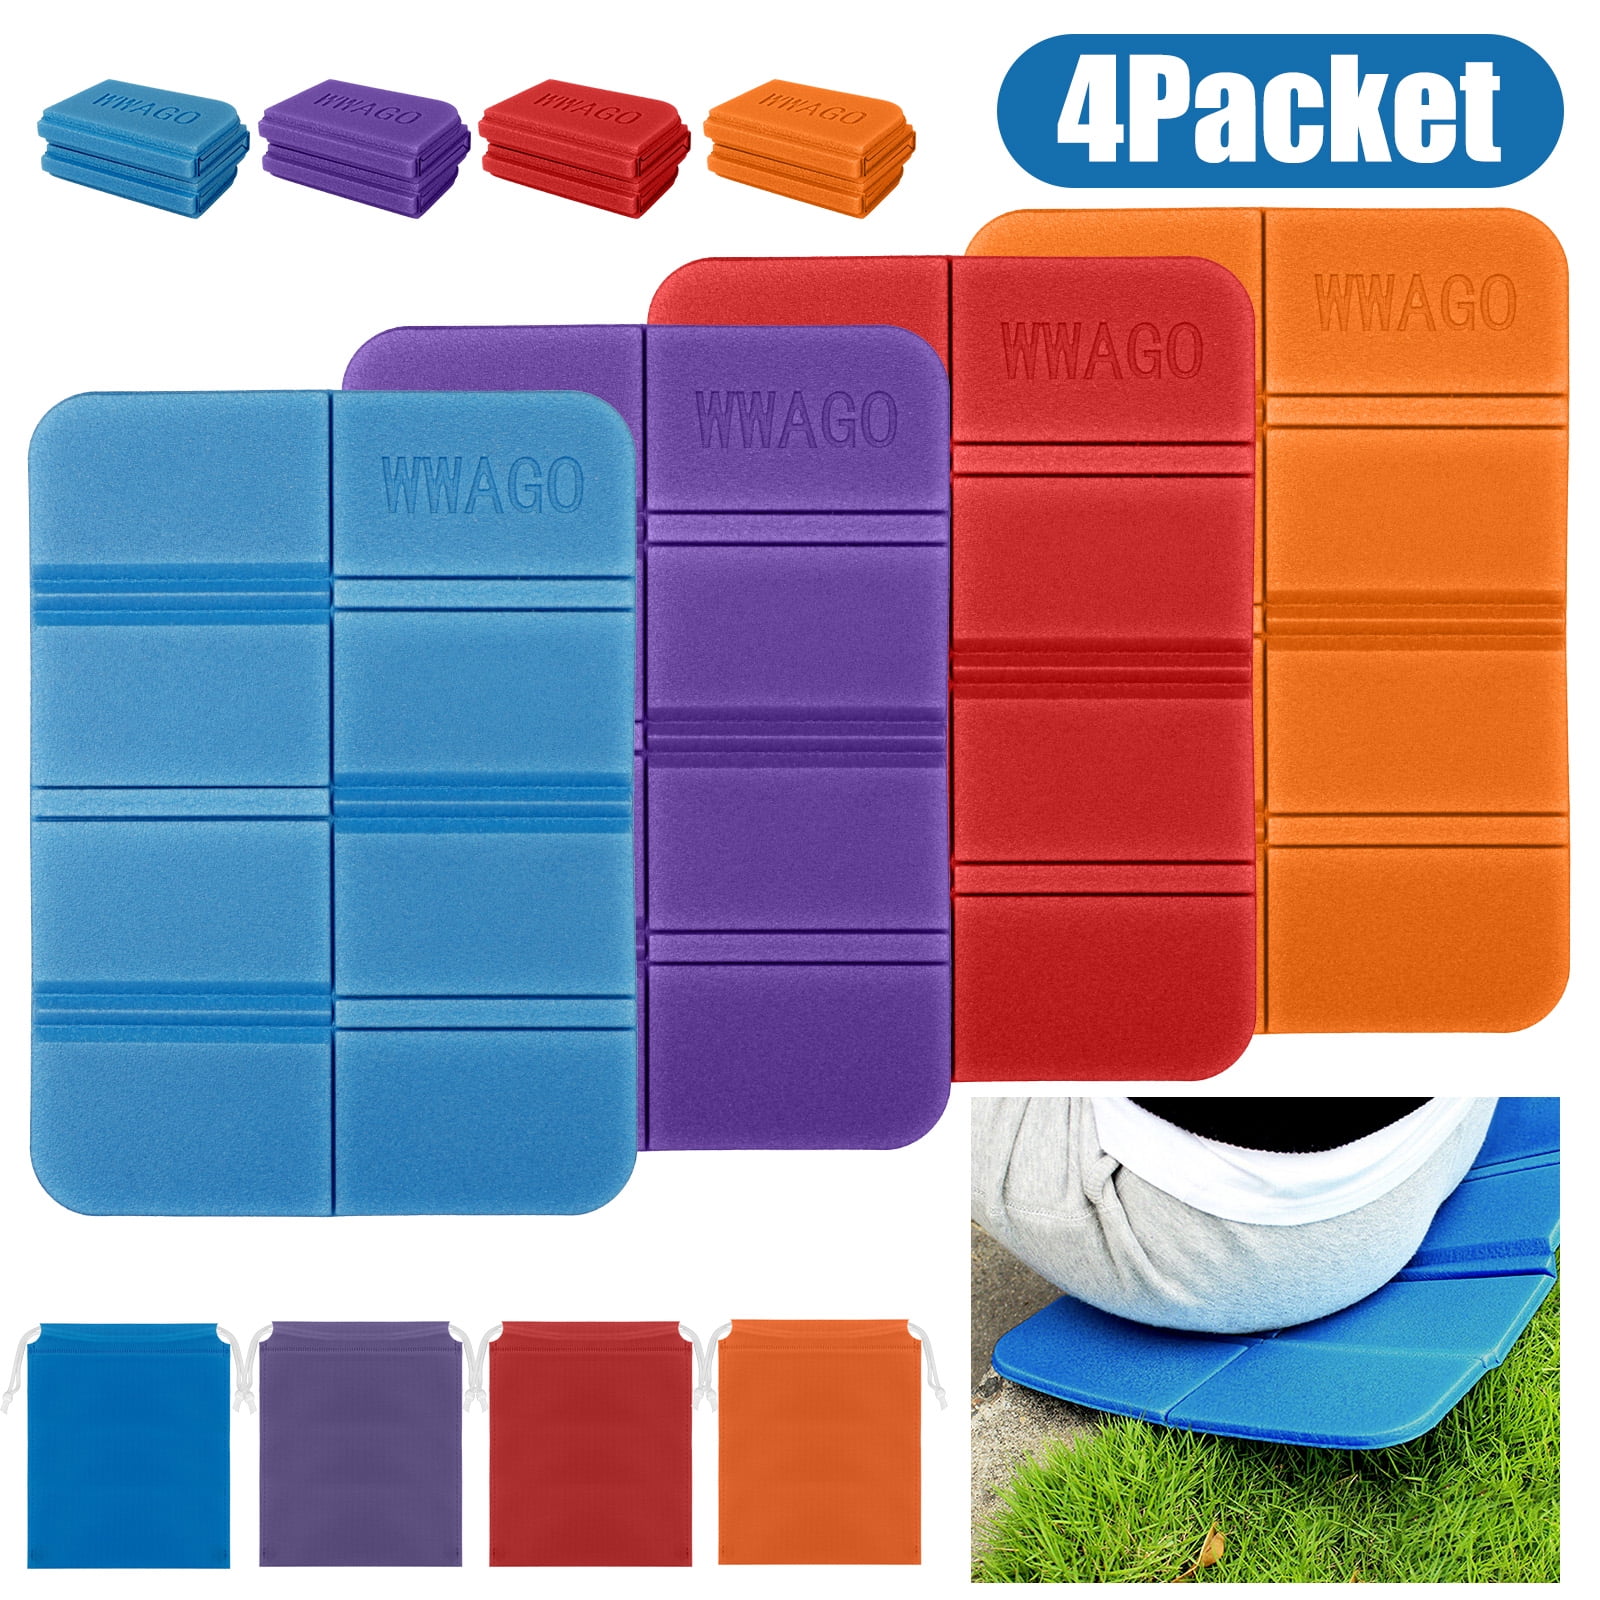 Alomejor Outdoor Sitting Pad, Multi Functional Foam Padded Hunting Seat  Cushion Dustproof Zipper for Picnic